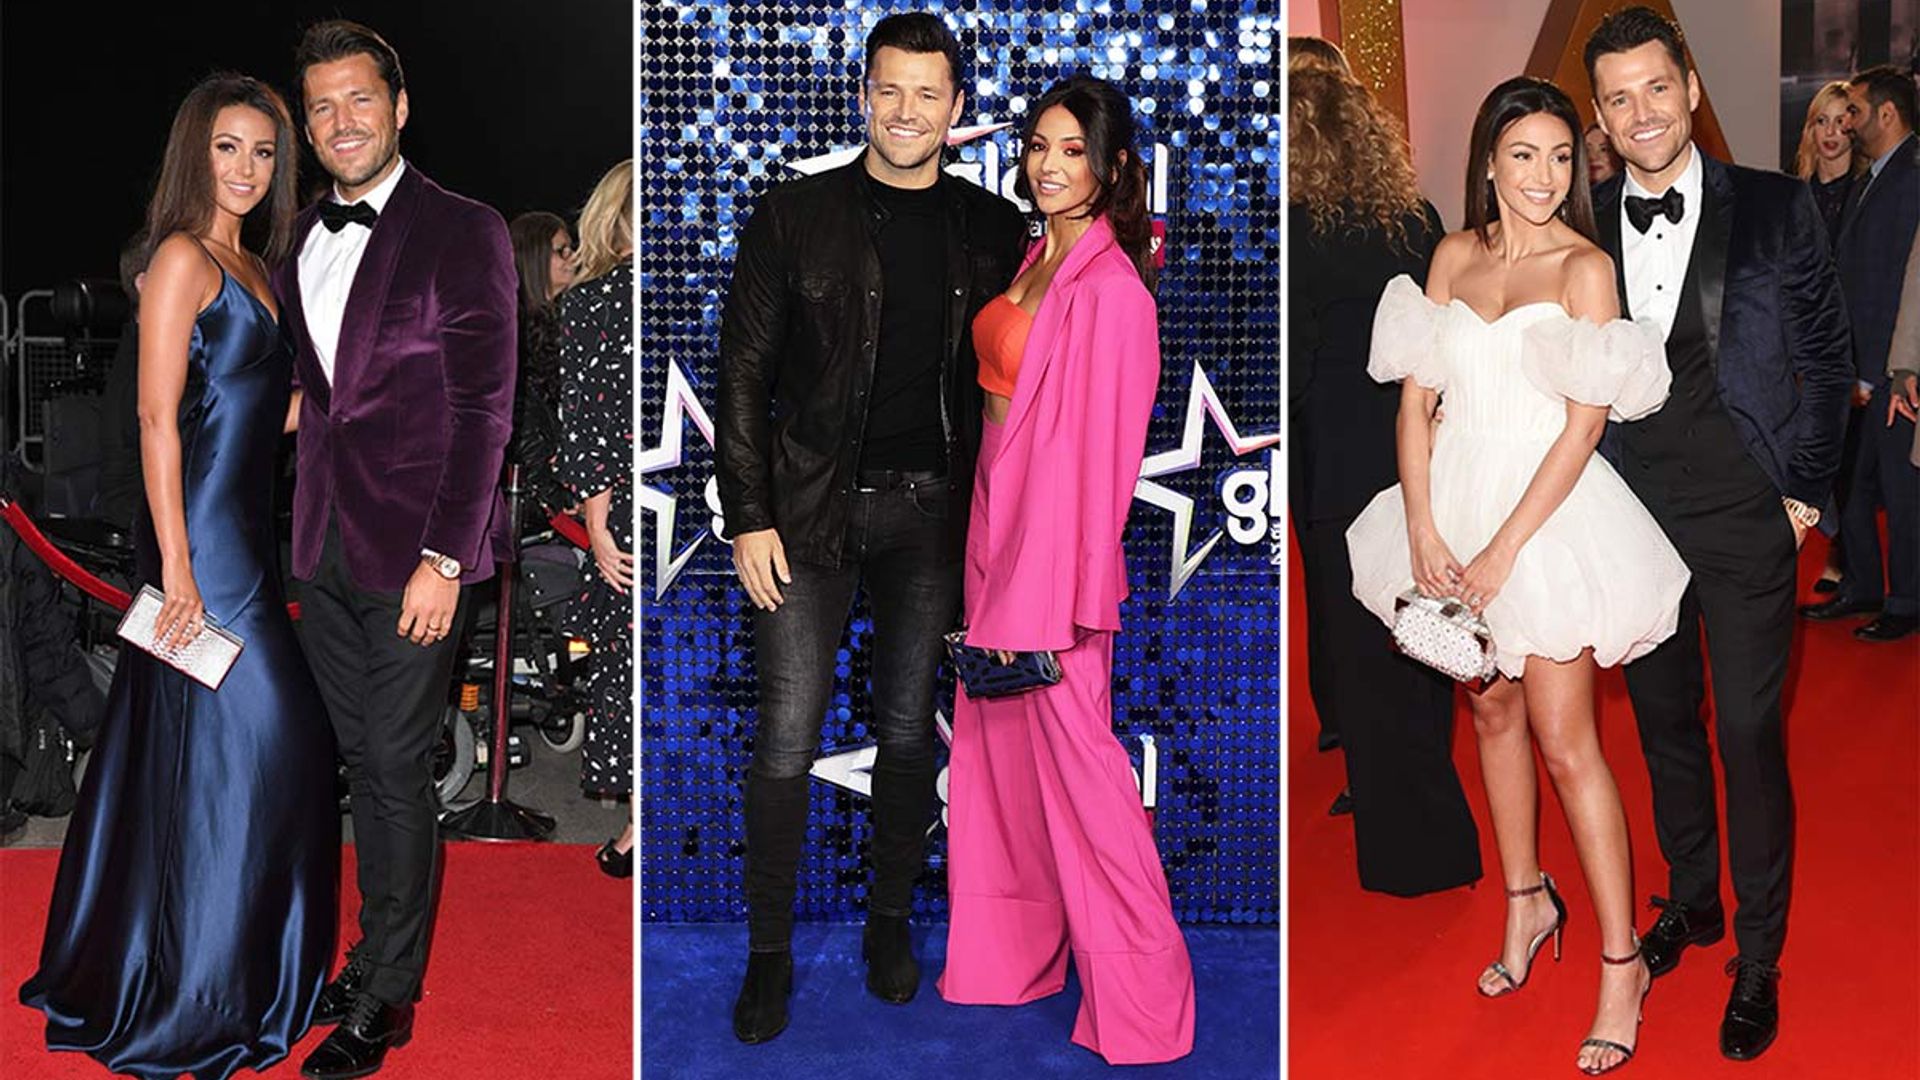 Mark Wright and Michelle Keegan's date night style in pictures